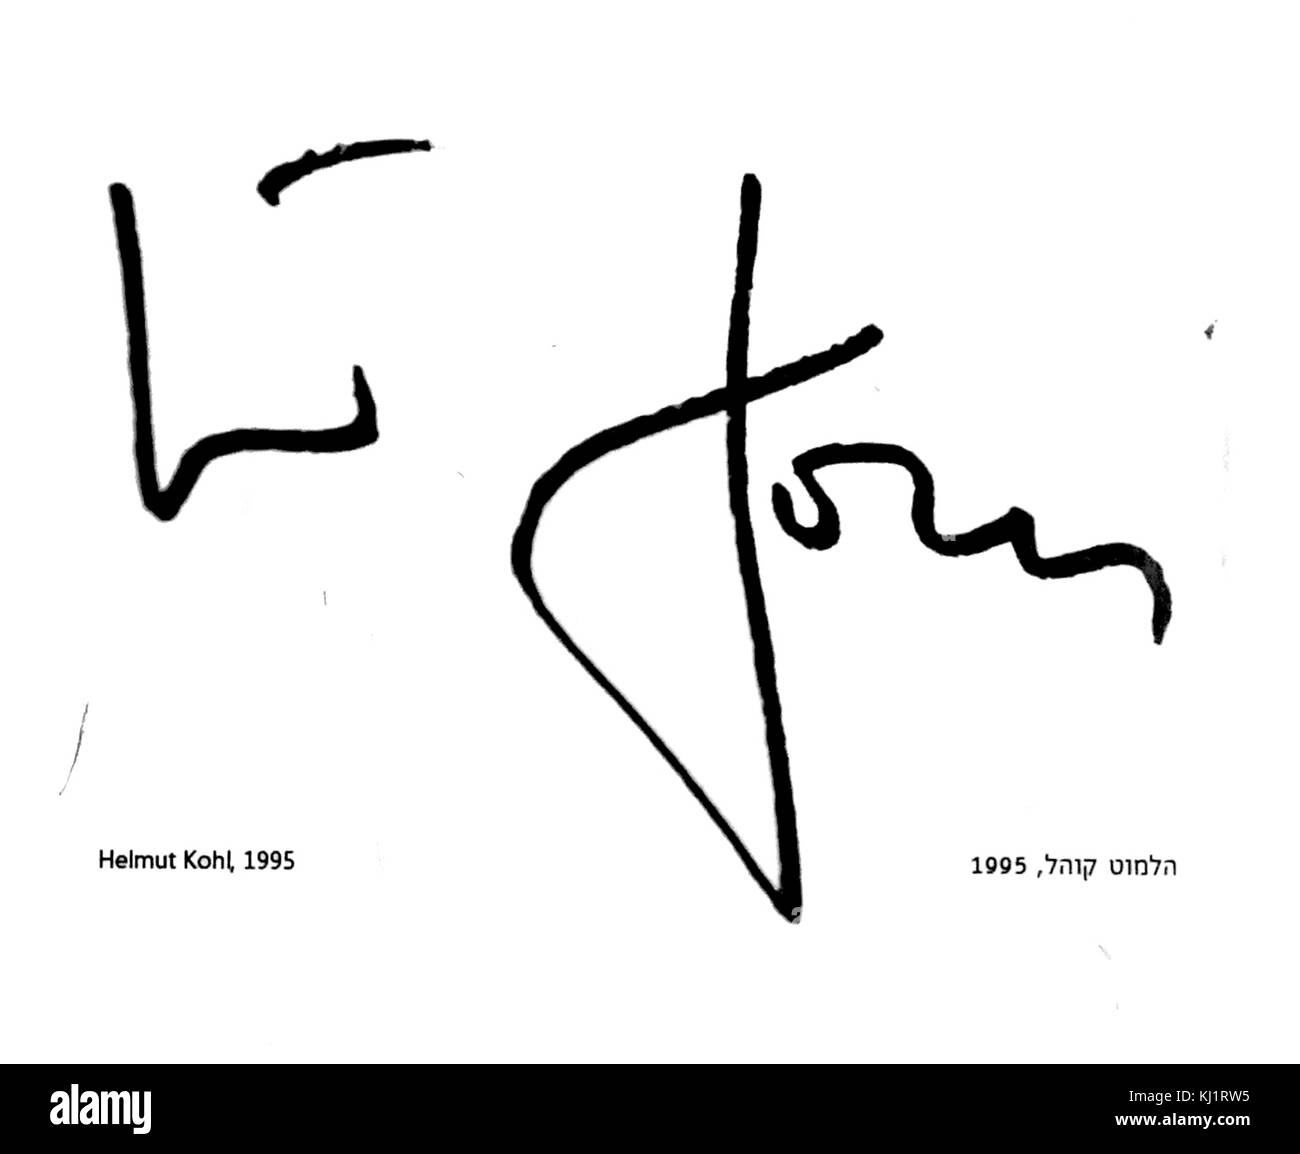 Signature of Helmut Kohl (born 3 April 1930) German statesman, who served as Chancellor of Germany from 1982 to 1998 The signature appears in the entrance lobby of the King David Hotel, Jerusalem Israel Stock Photo